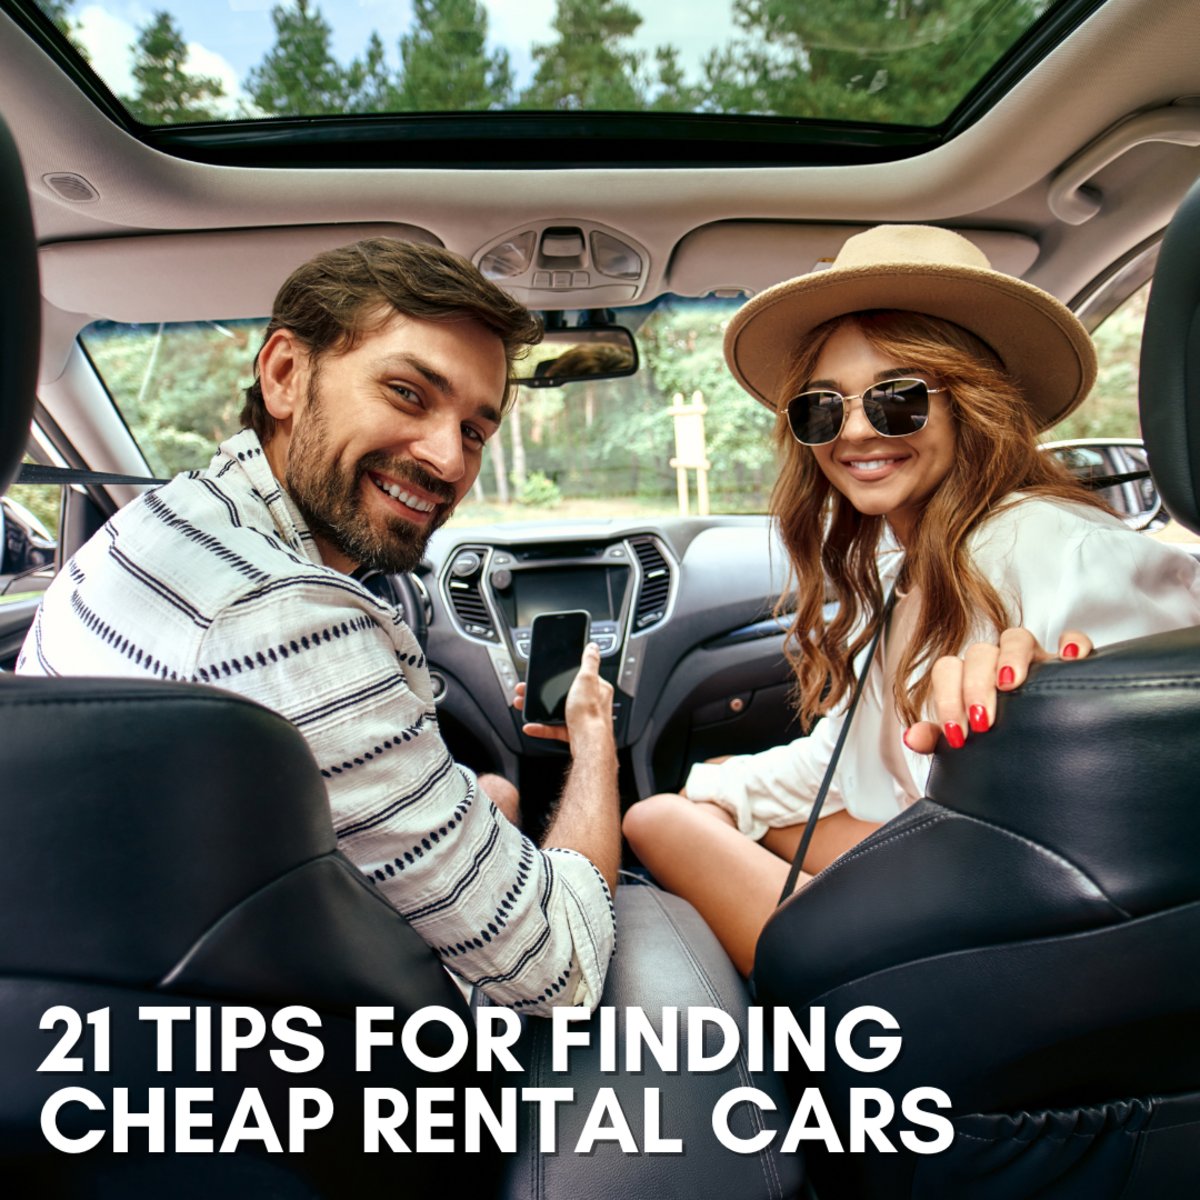 Planning on hitting the open road on your way to Roseville? 🚗 Read these 21 tips for scoring sweet deals on #rentalcars so that you can explore without breaking the bank. bit.ly/3uBCqBJ #roadtrip #savvytraveler